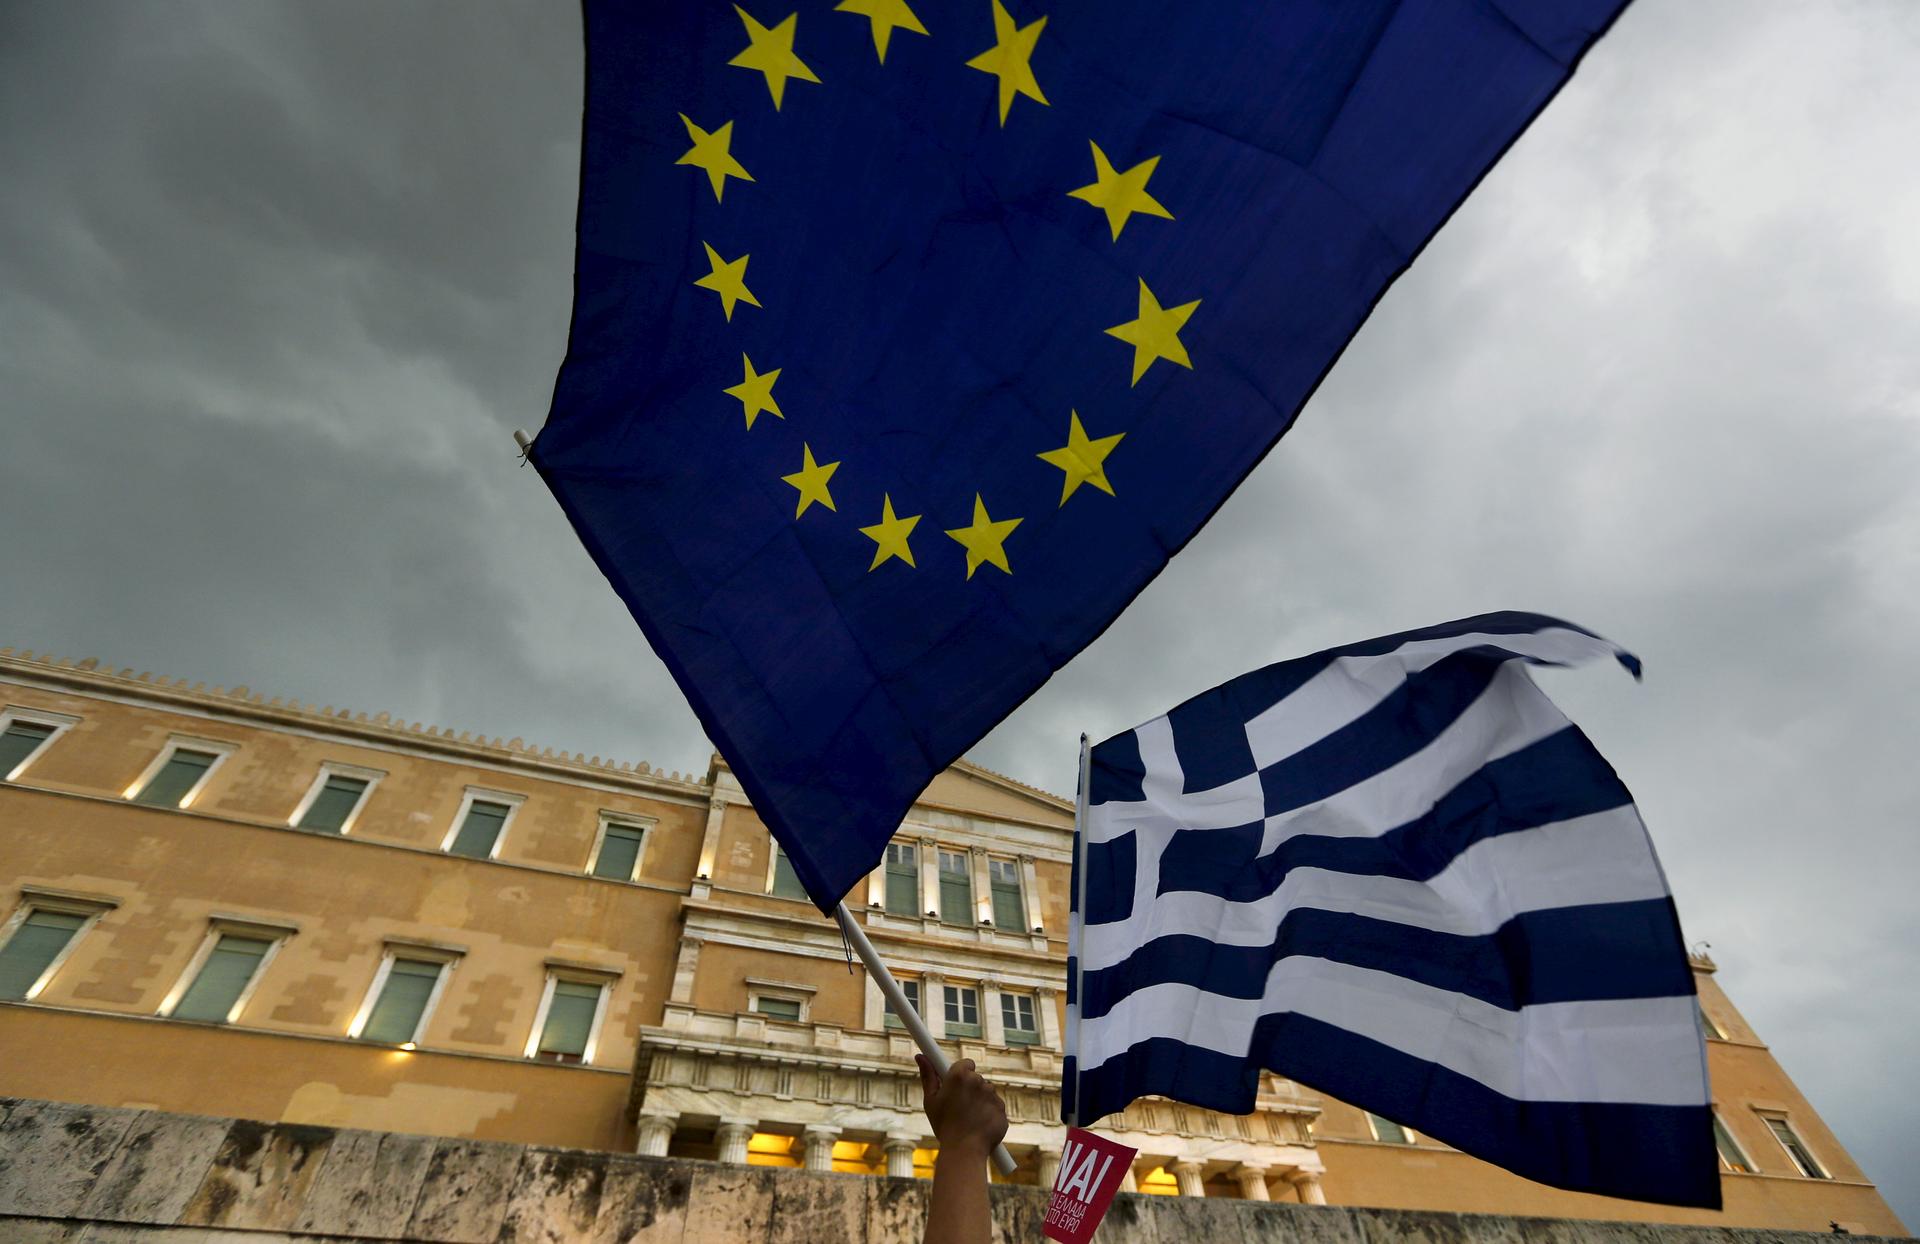 Two flags - one for Greece and one for the EU - fly during protests in Athens this week